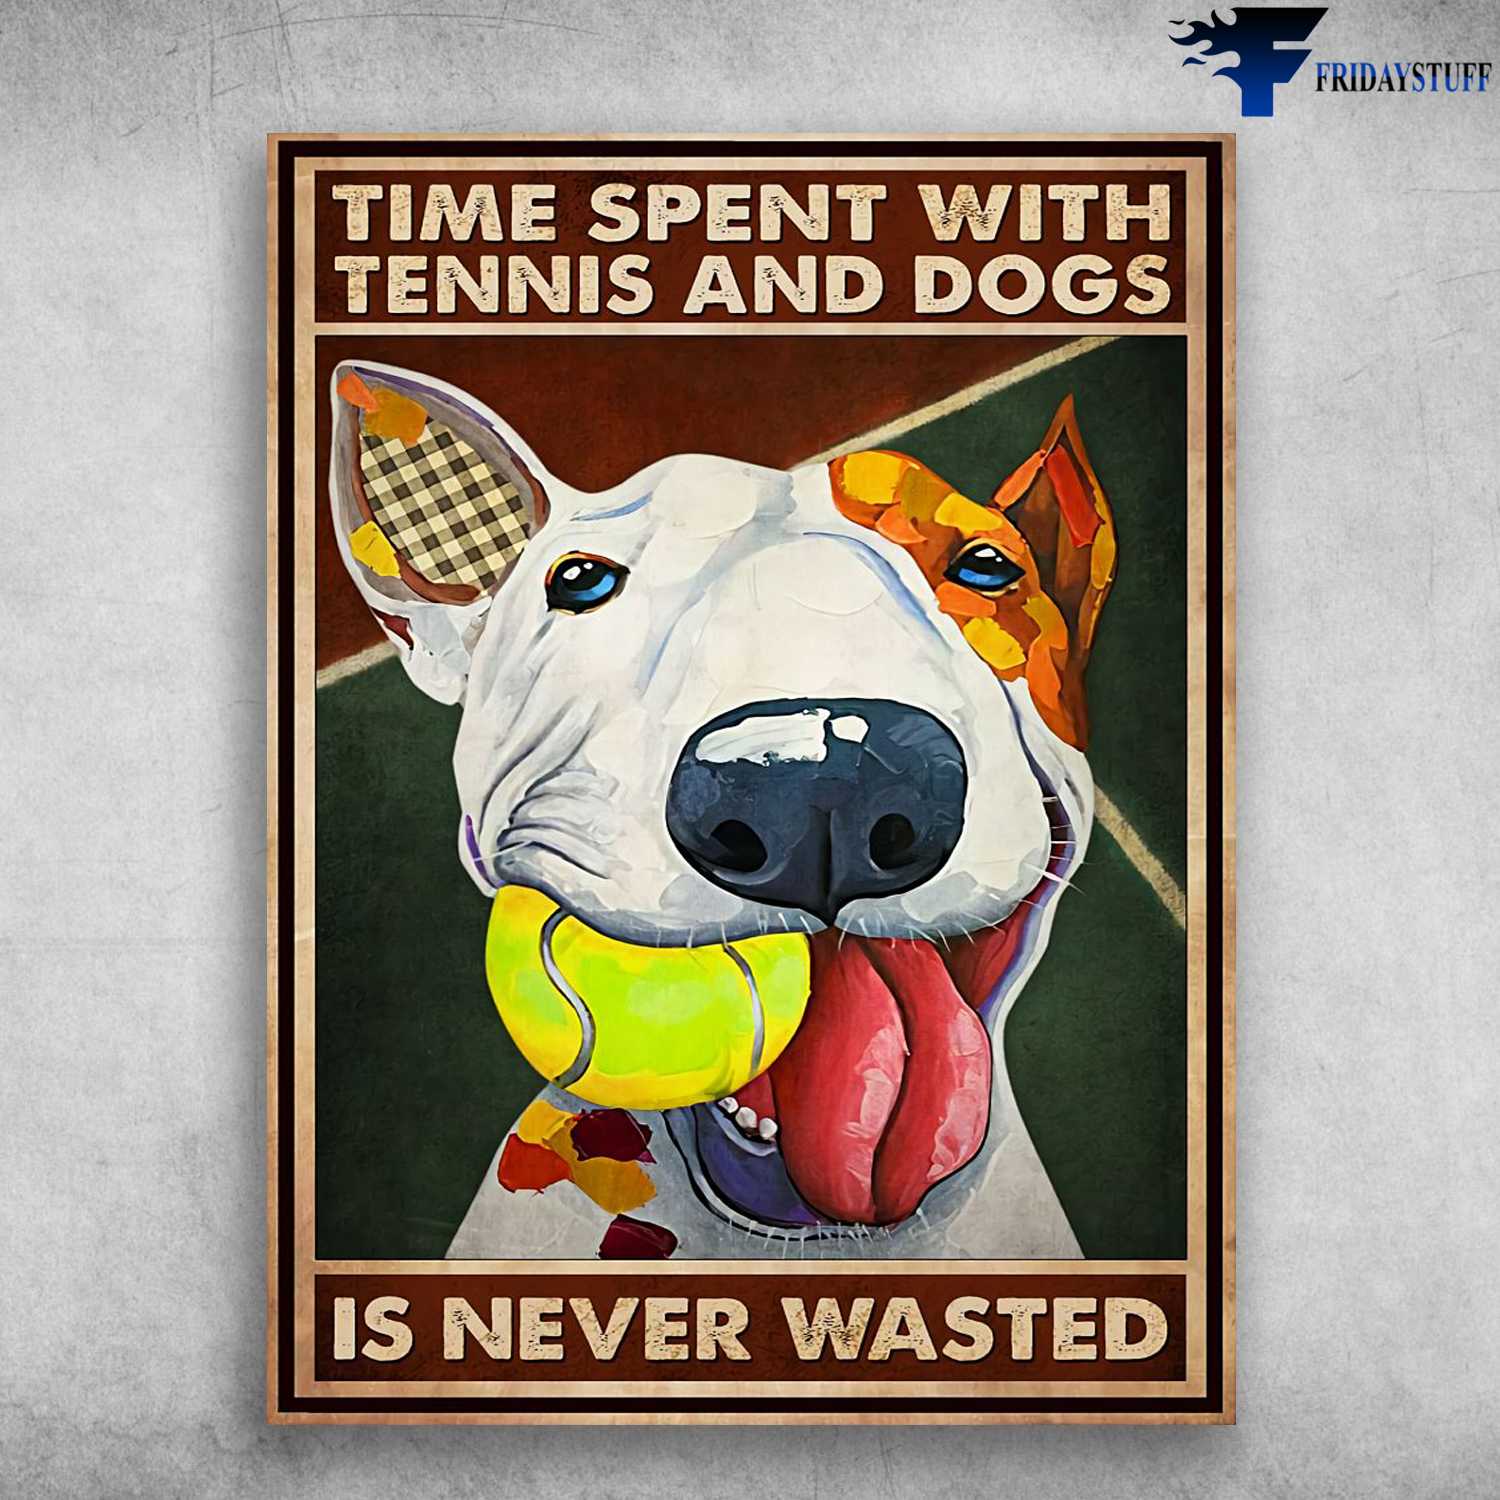 Dog Lover, Tennis Poster - Time Spent With, Tennis And Dogs, Is Never Wasted